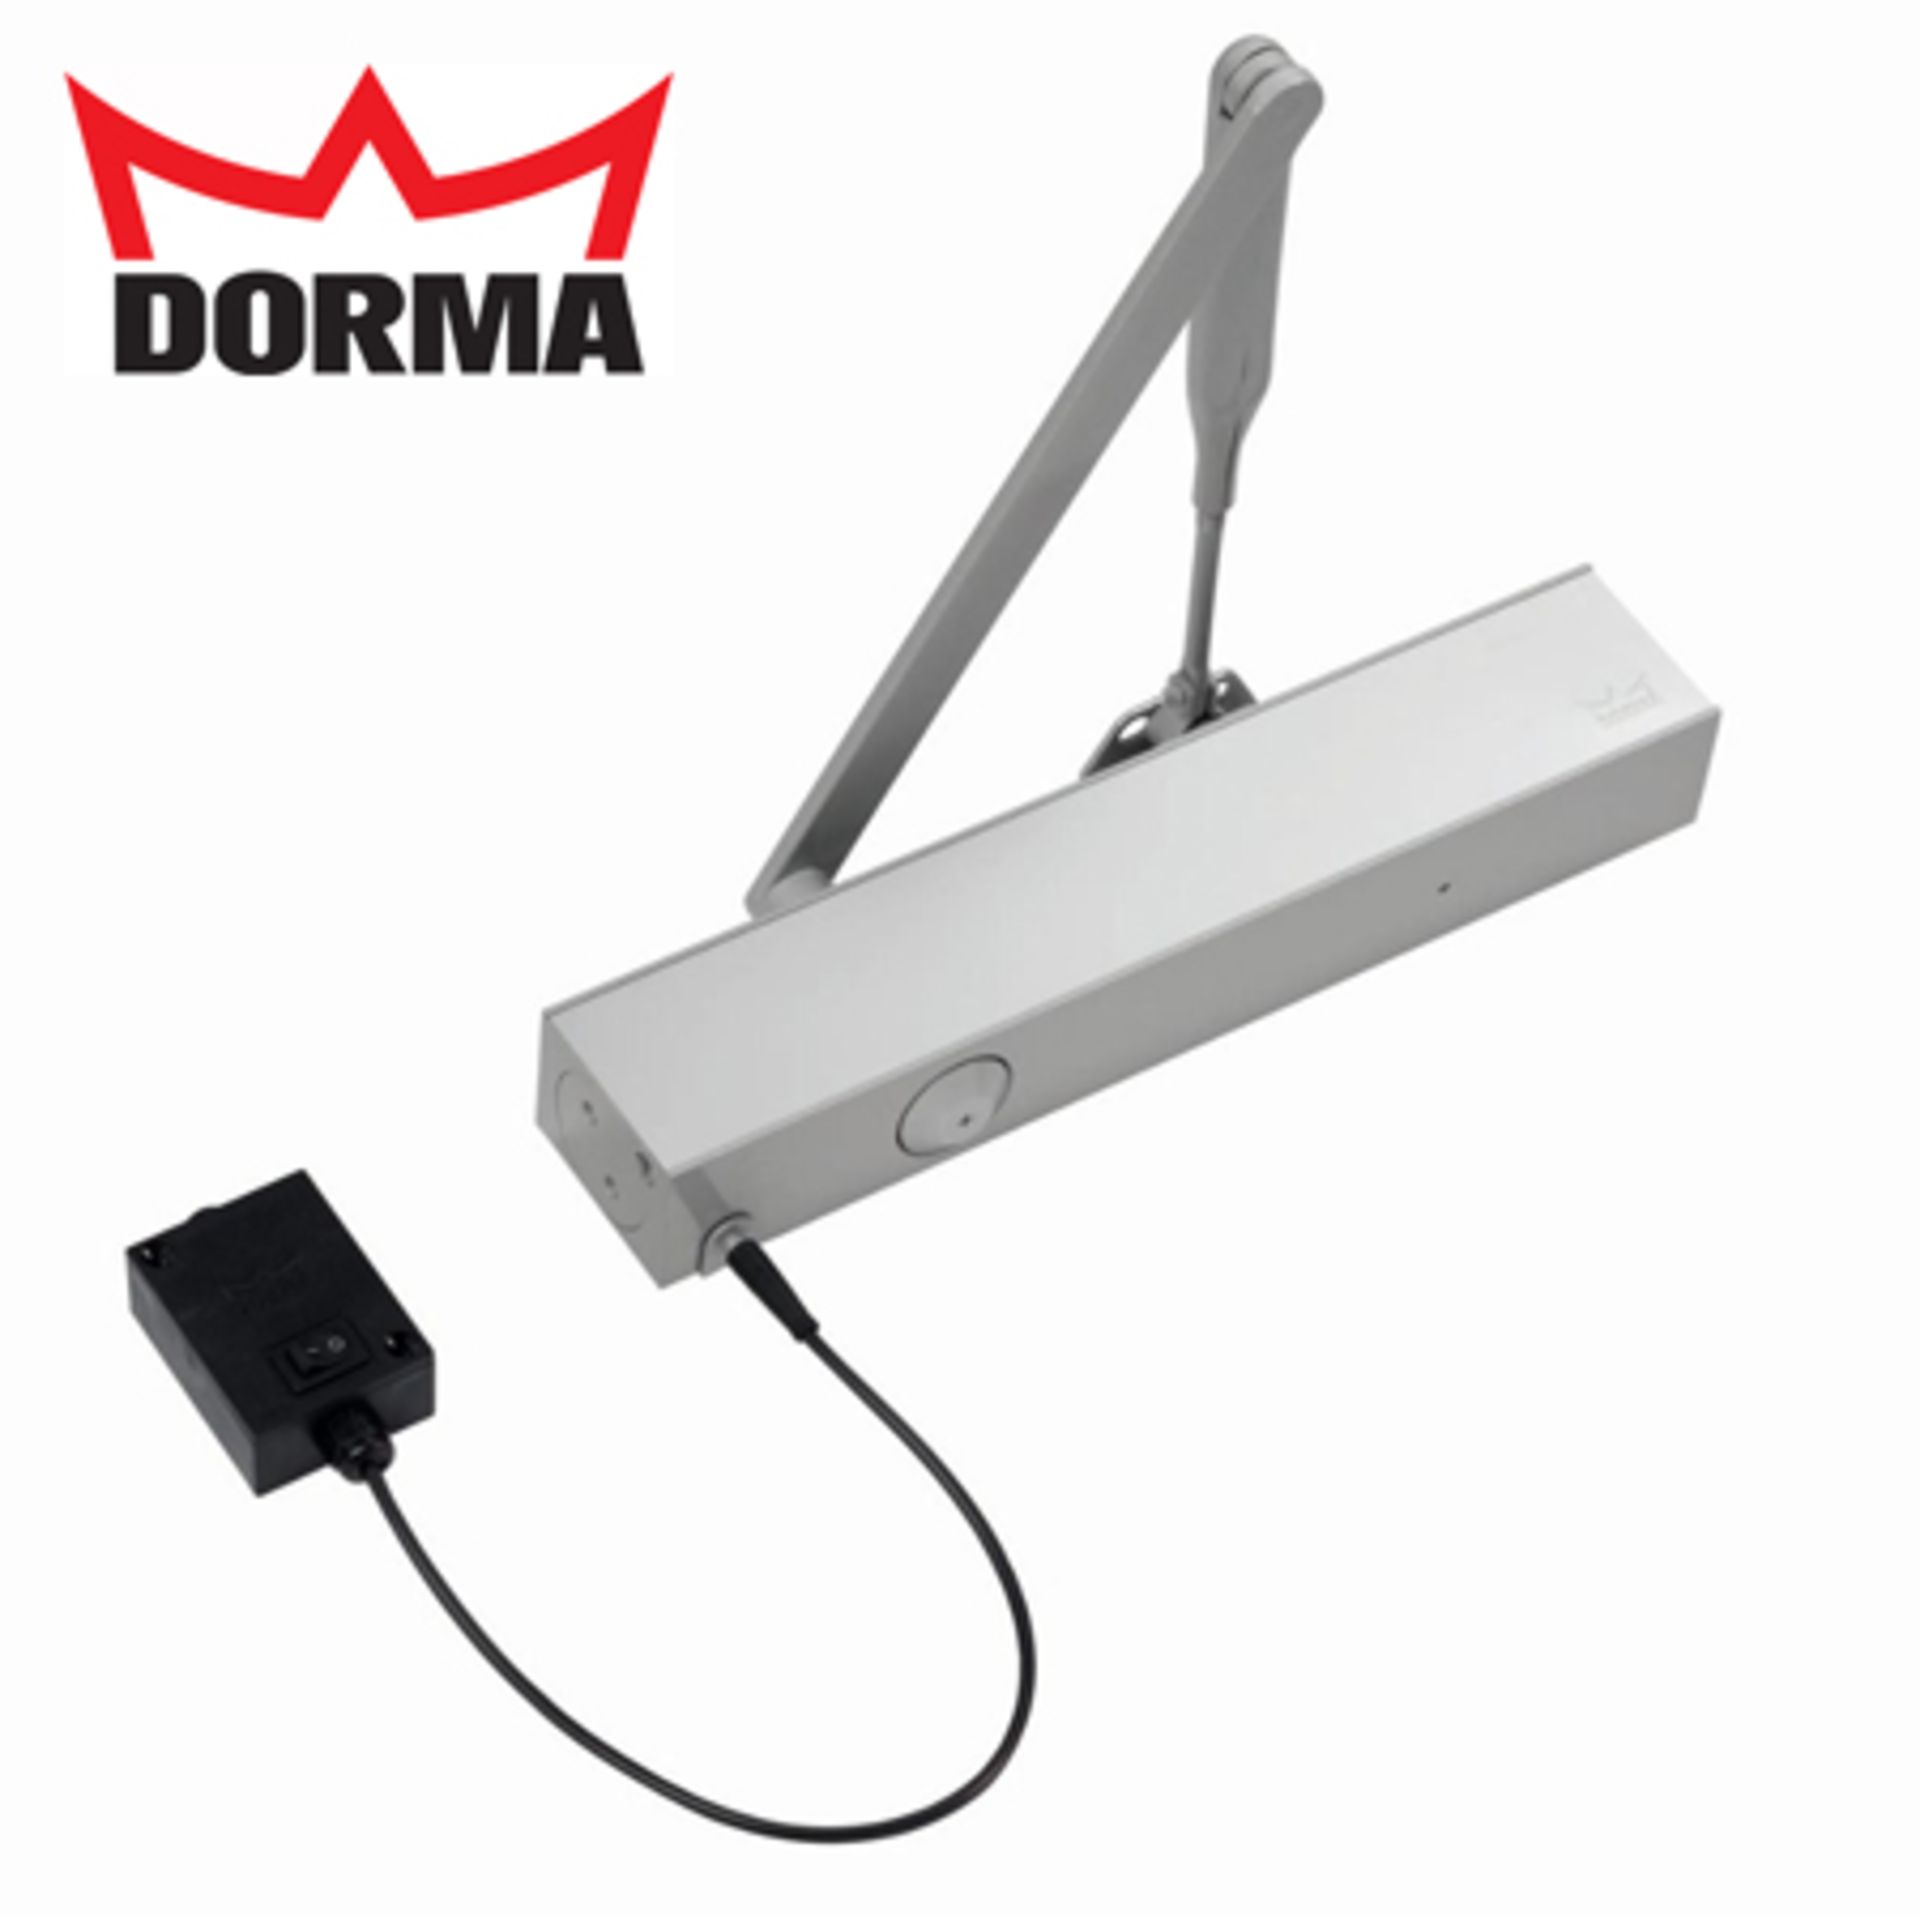 DORMA TS 73 EMF RACK AND PINION ELECTROMAGNETIC HOLD OPEN DOOR CLOSER